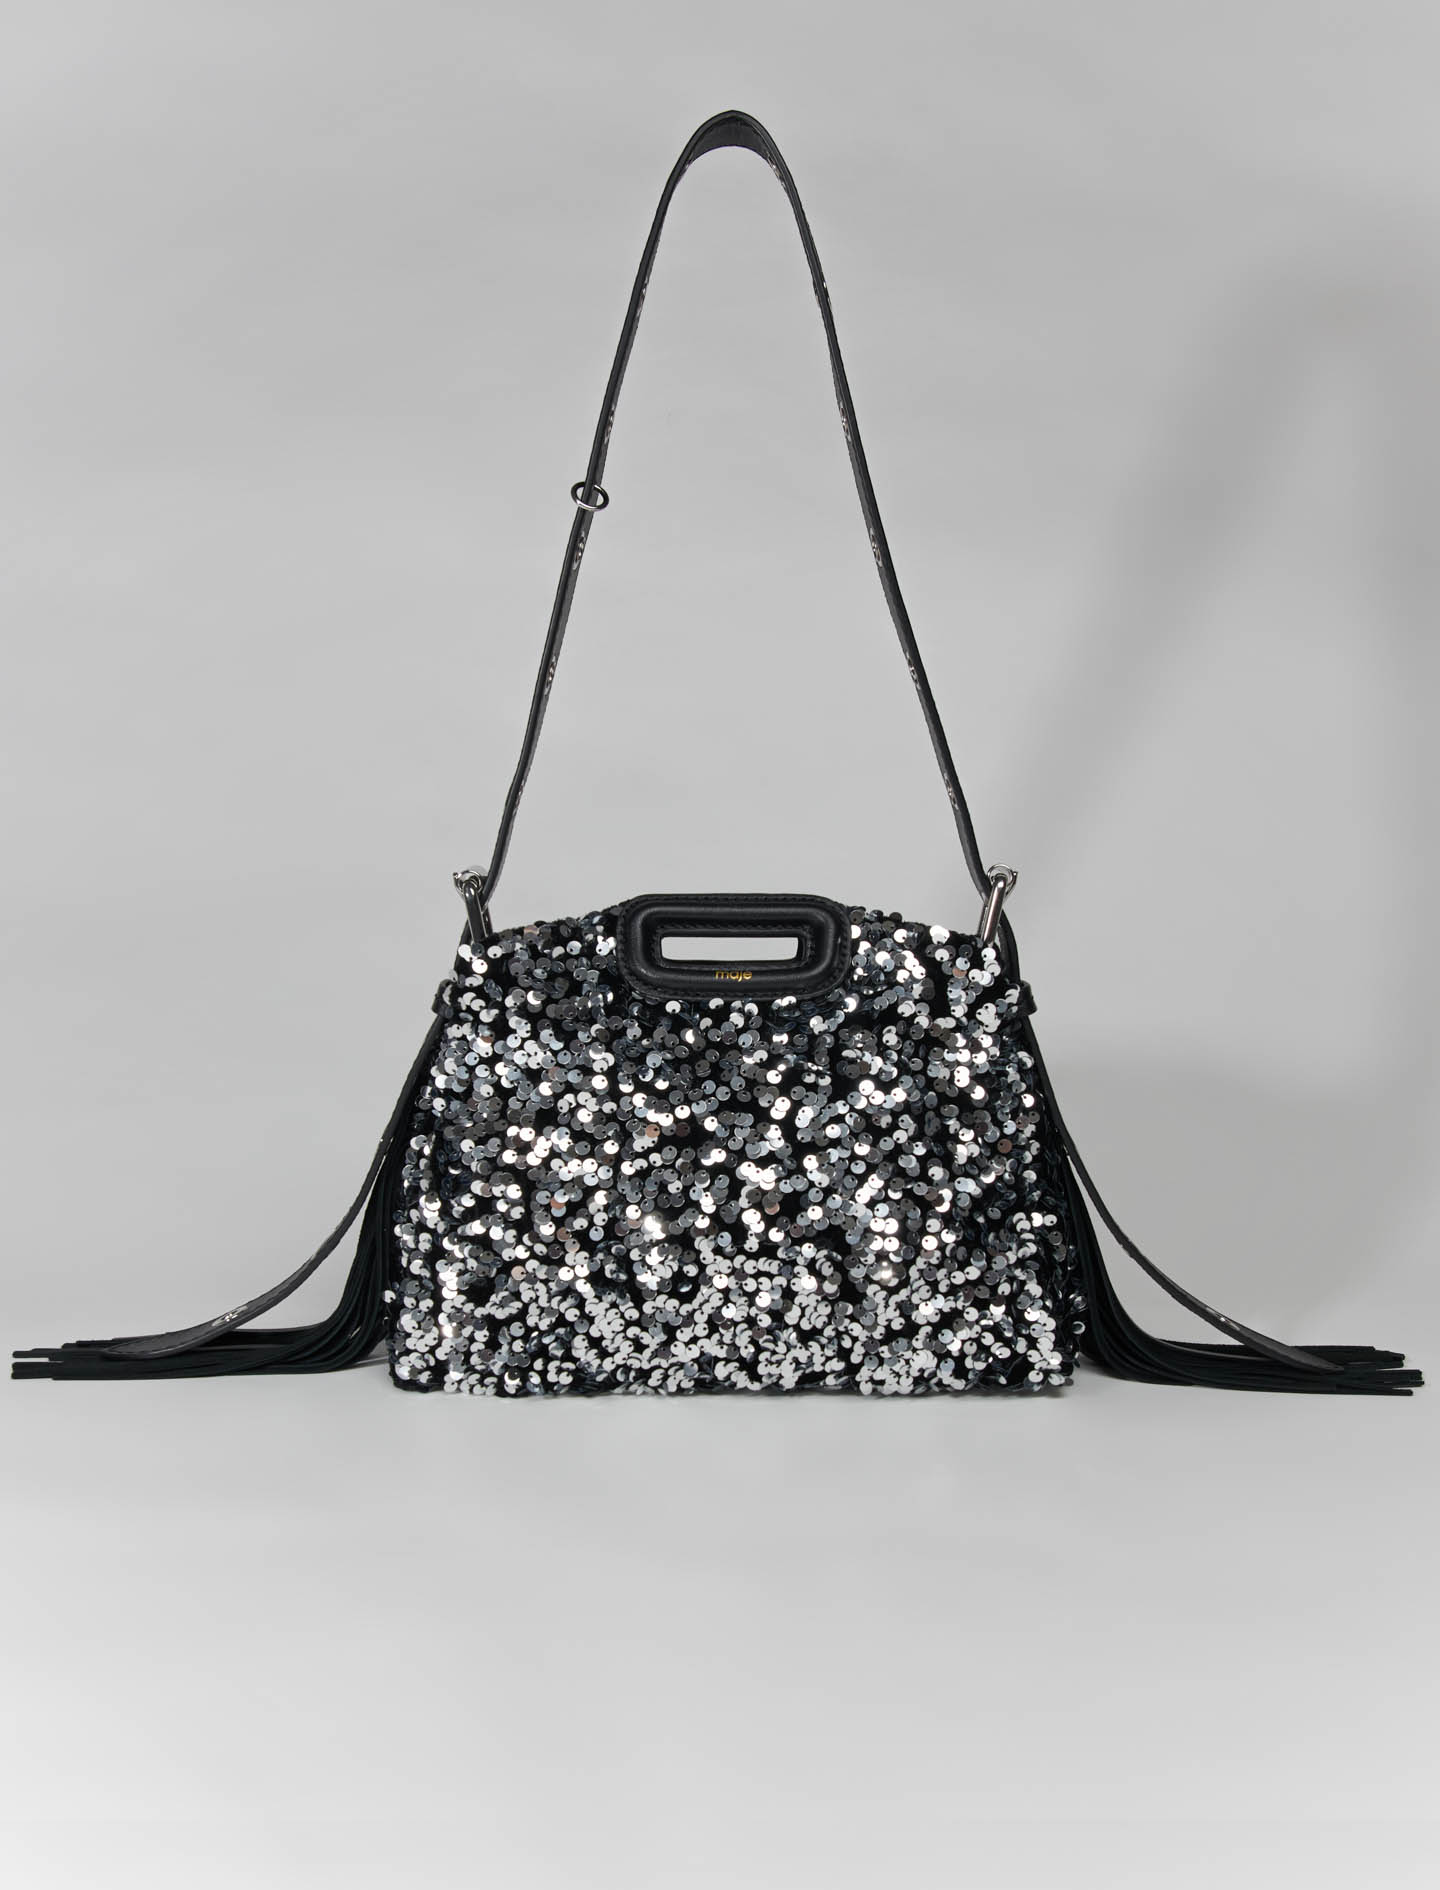 Mixte's polyester, Sequin mini Miss M bag for Fall/Winter, size Mixte-All Bags-OS (ONE SIZE), in color Black / Black